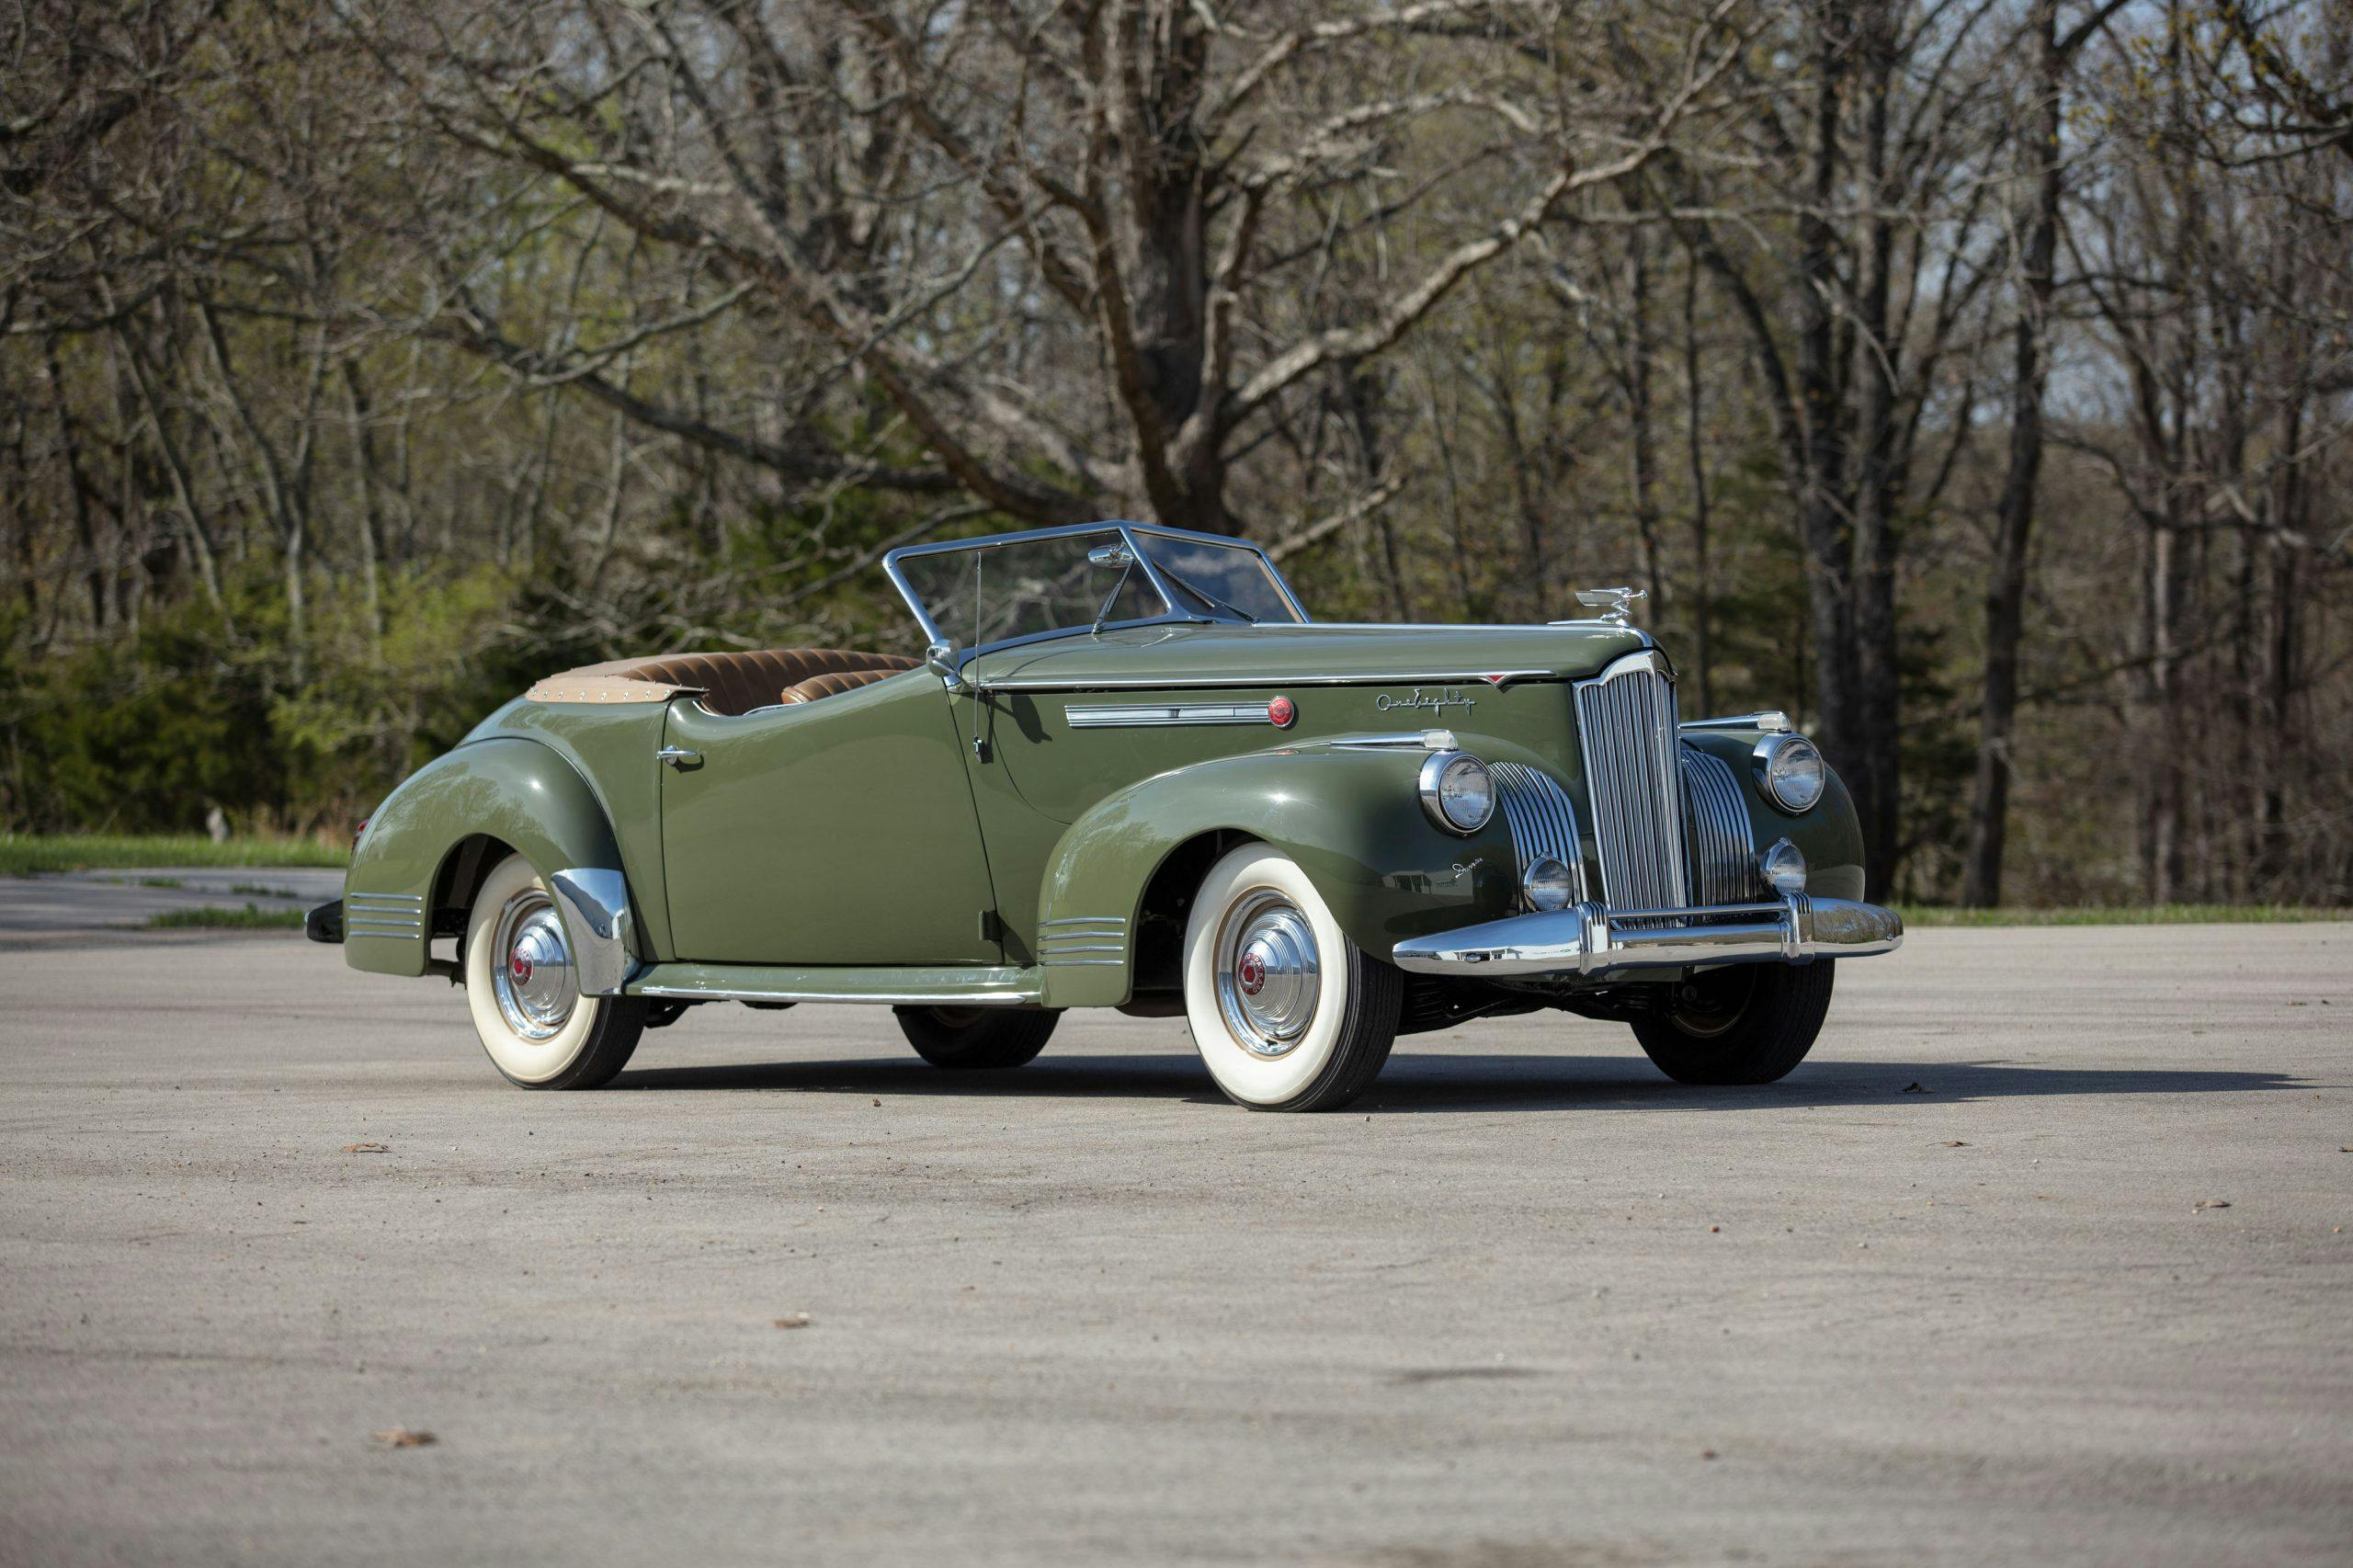 1941 Packard Darrin One-Eighty Convertible Victoria front three-quarter